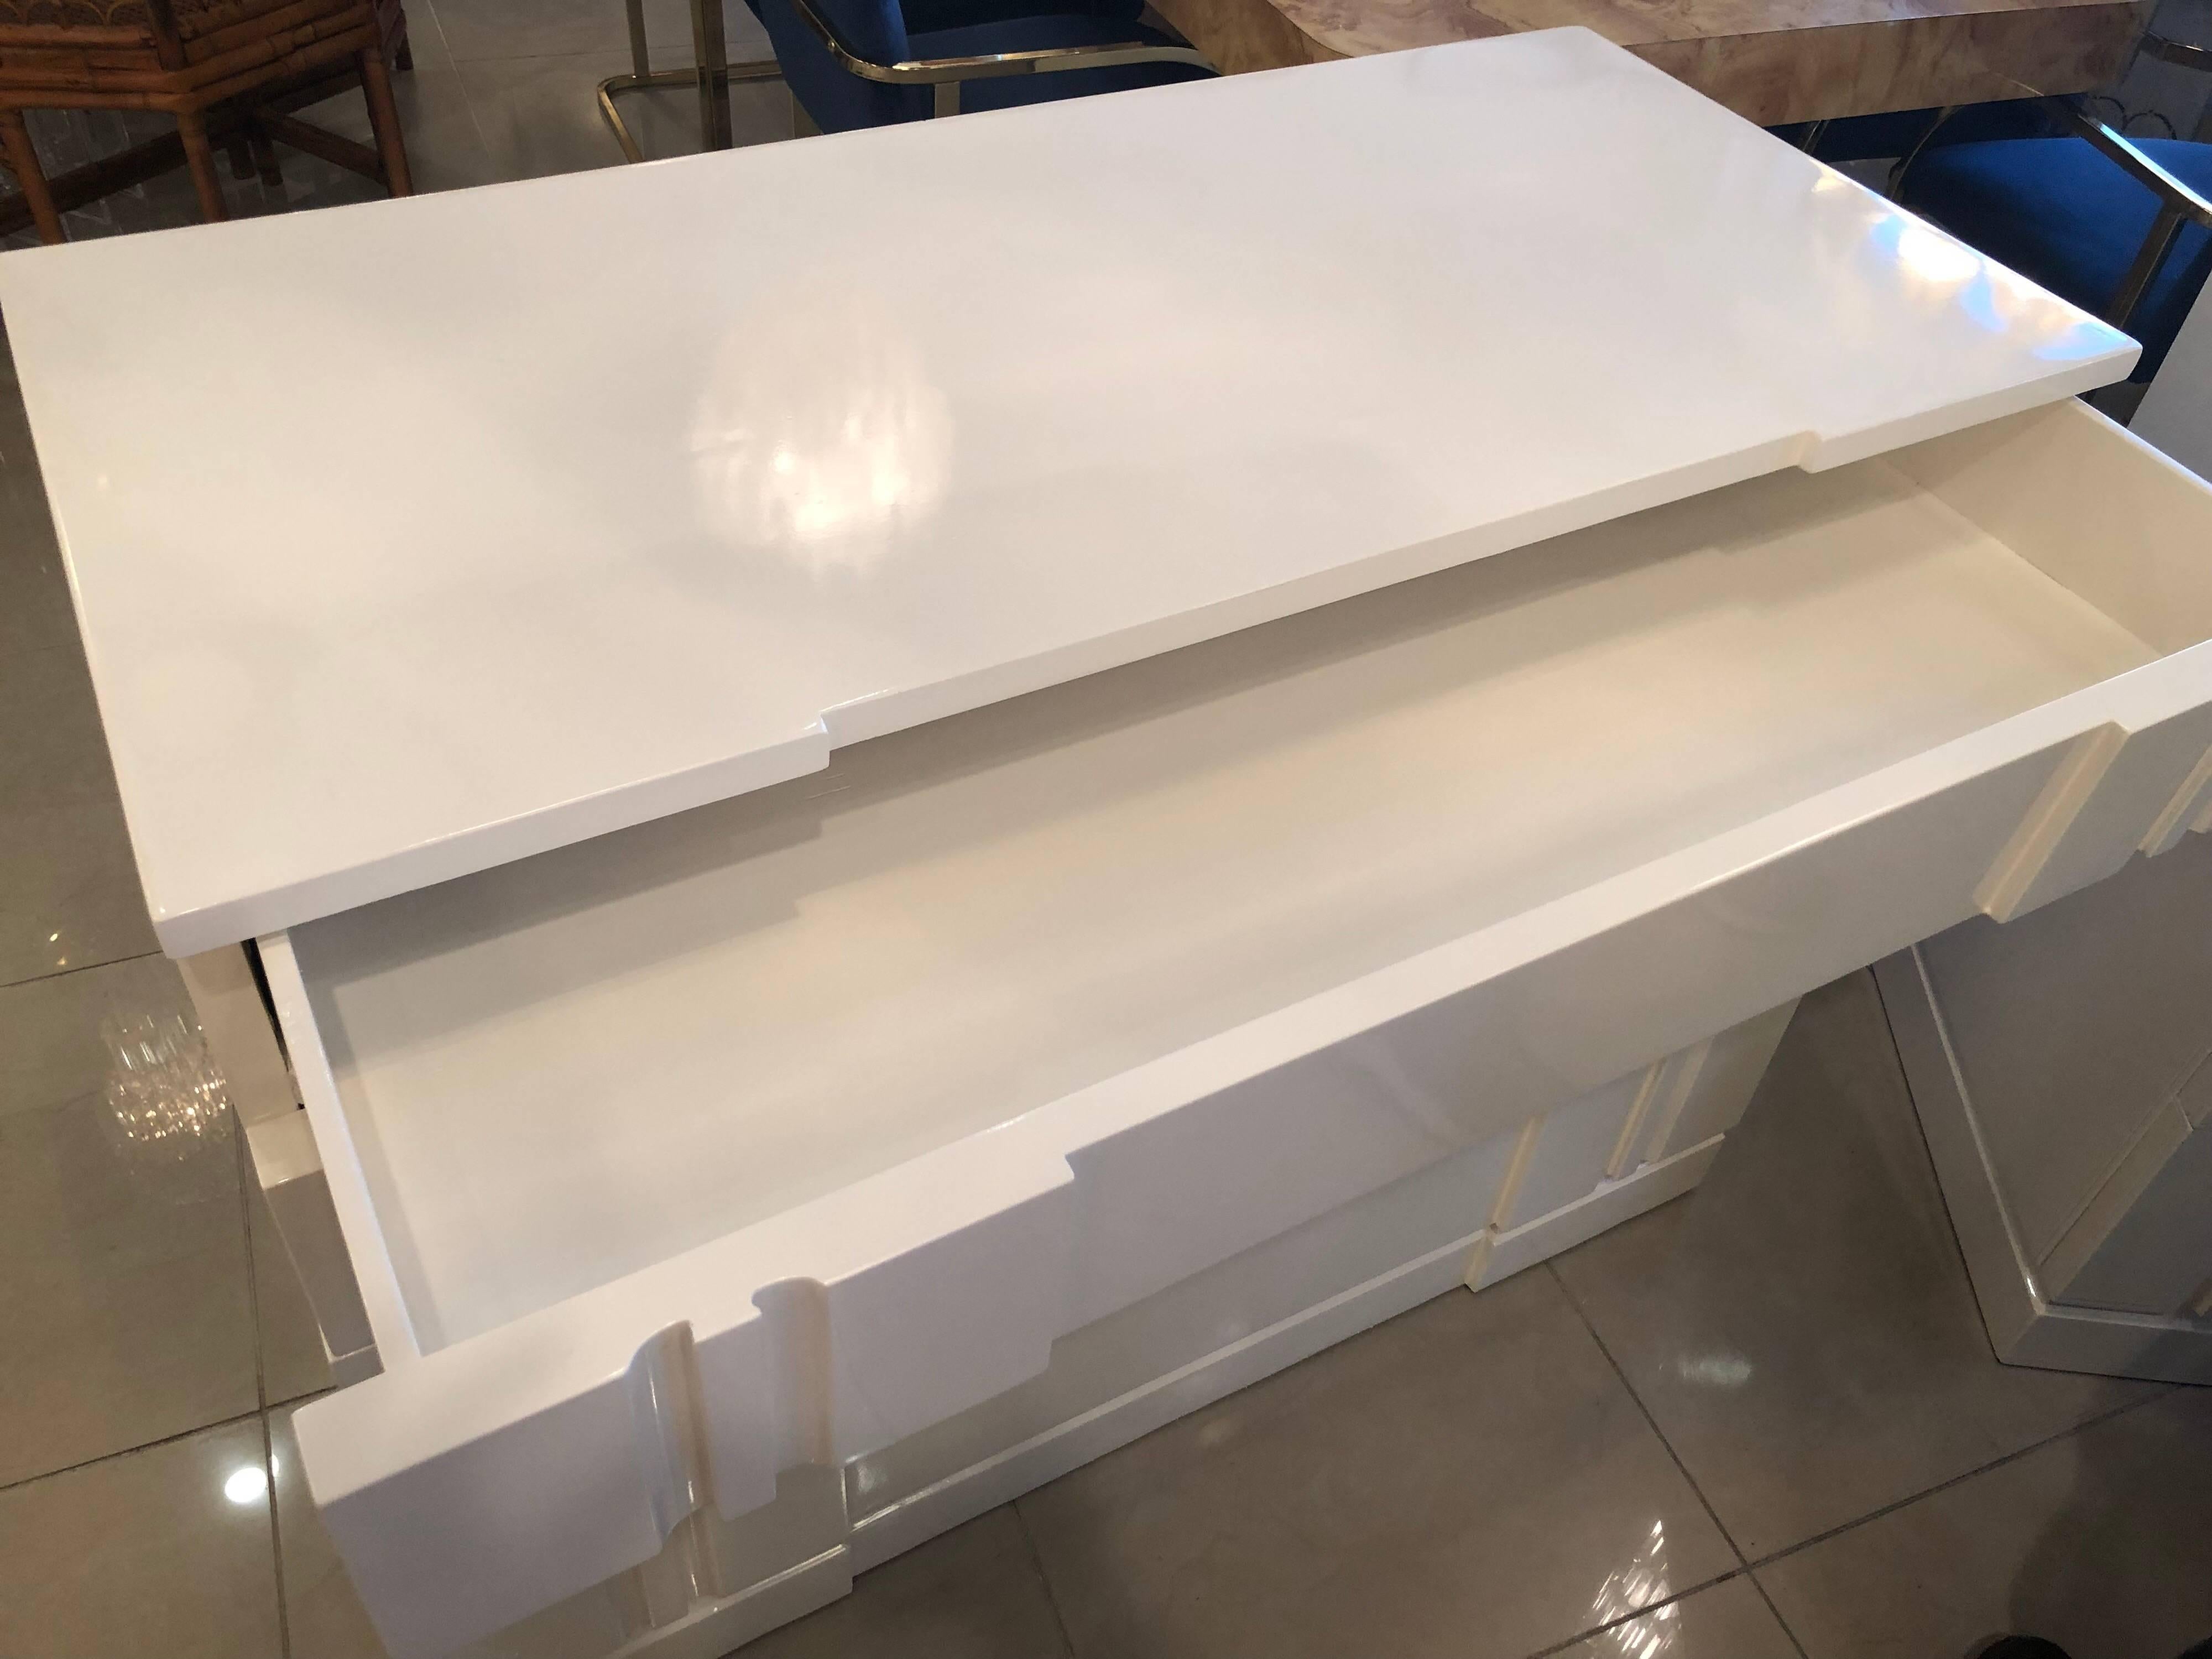 Newly lacquered, including inside of all drawers, in a lovely linen white, pair of bachelor chests nightstands dressers. Clean, modern look. In the style of John Stuart. 